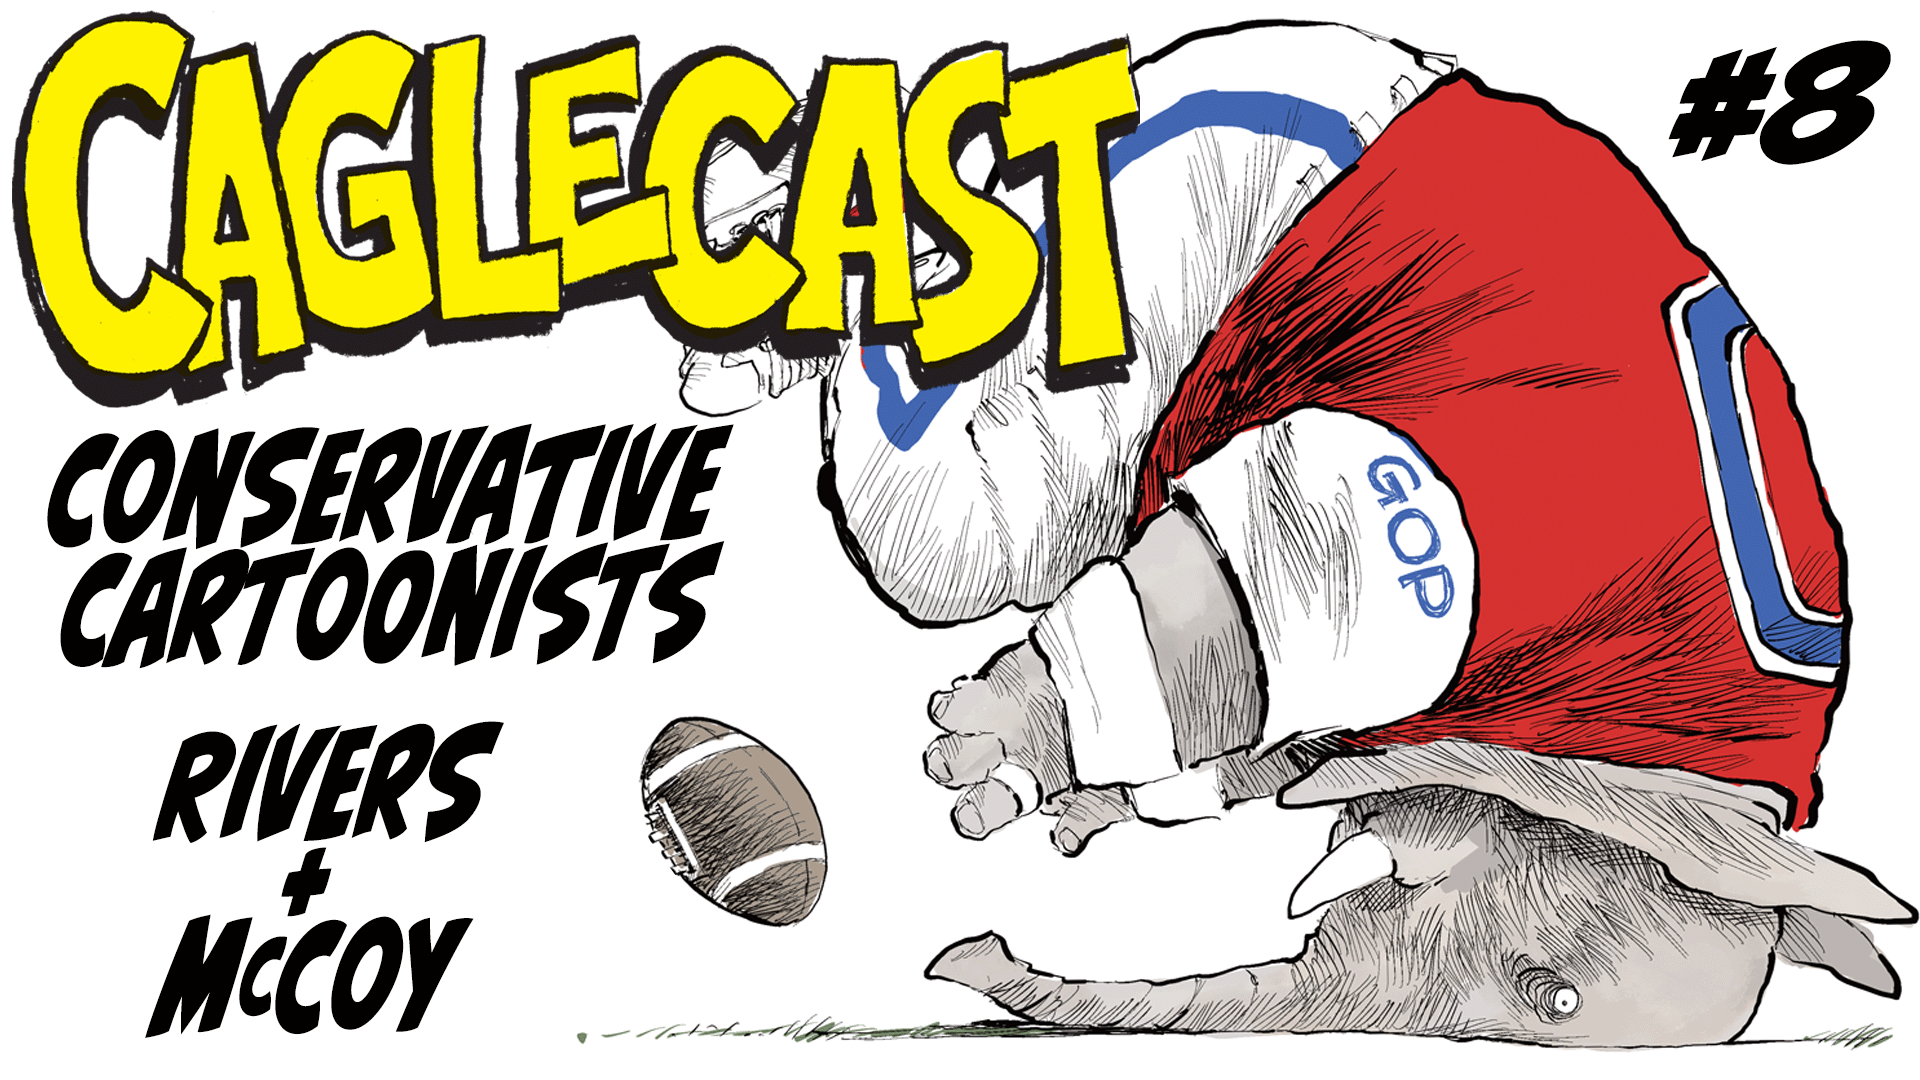 Conservative Political Cartoonists Gary McCoy and Rivers, Drawing Amongst Liberals #8 poster